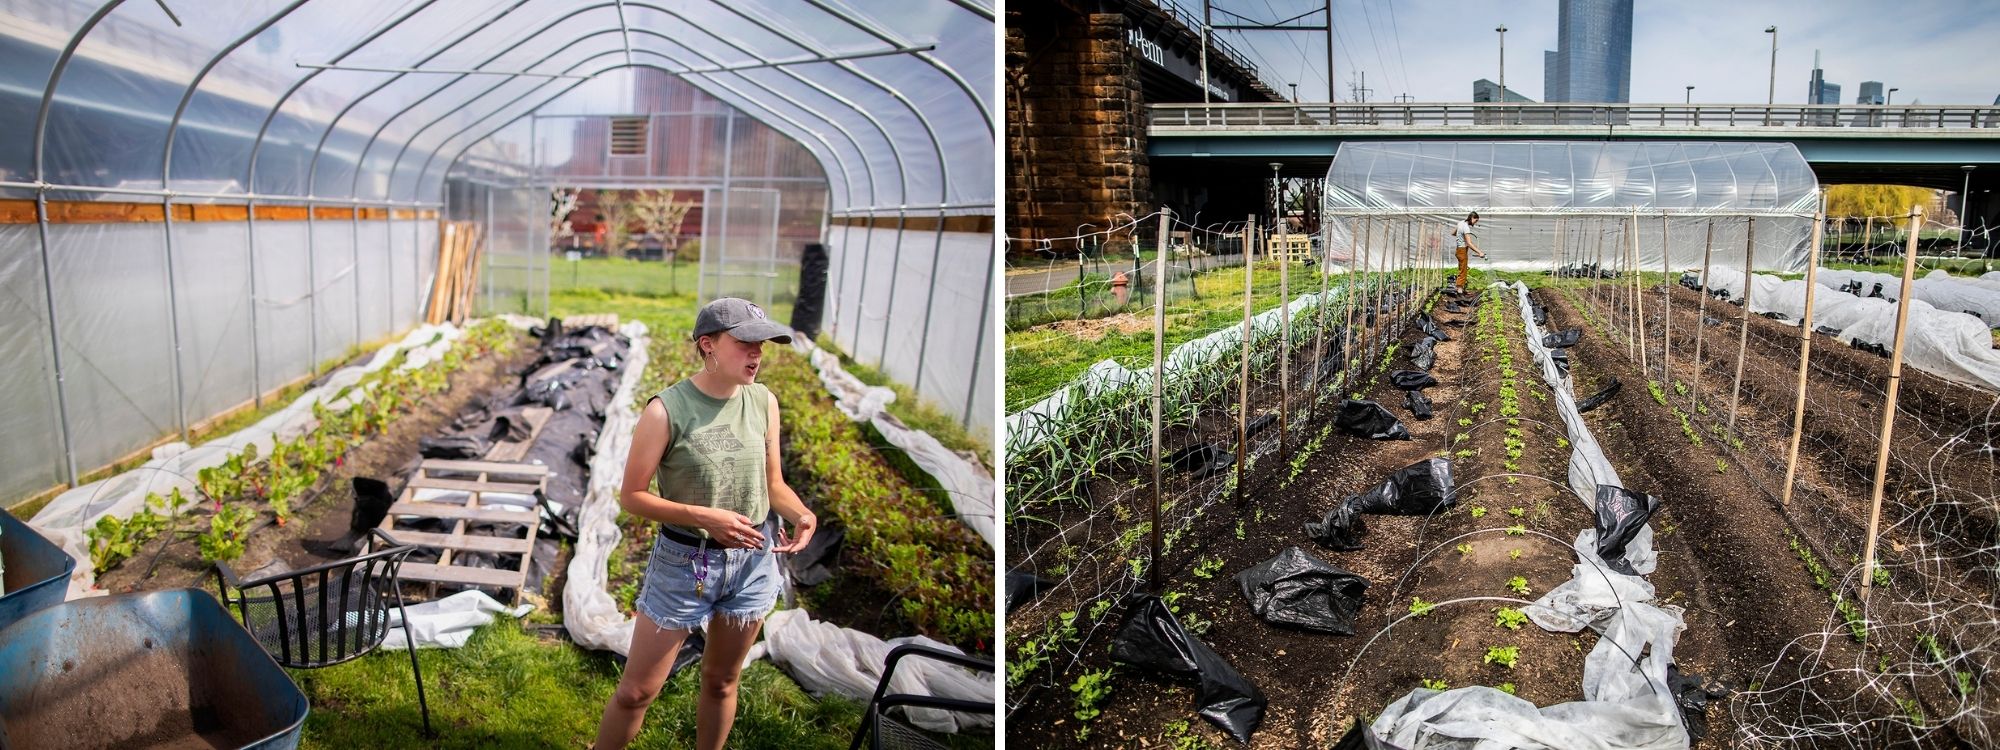 Left, a person standing in a greenhouse on Penn’s campus. Right: Vegetables growing in a greenhouse.